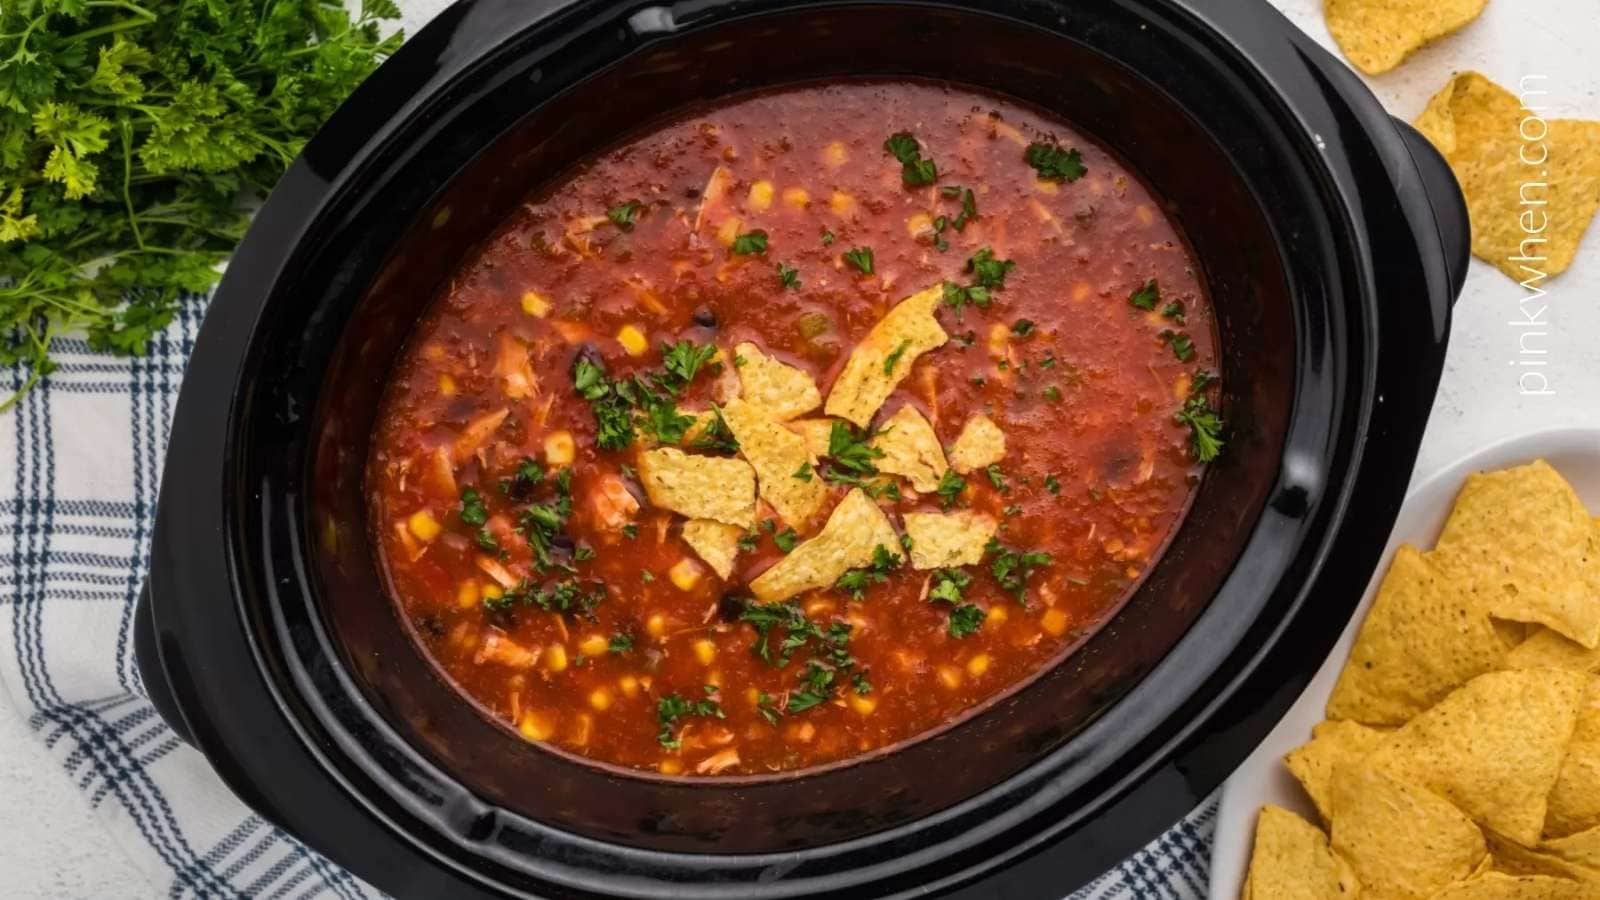 A crock pot full of mexican chili and tortilla chips.